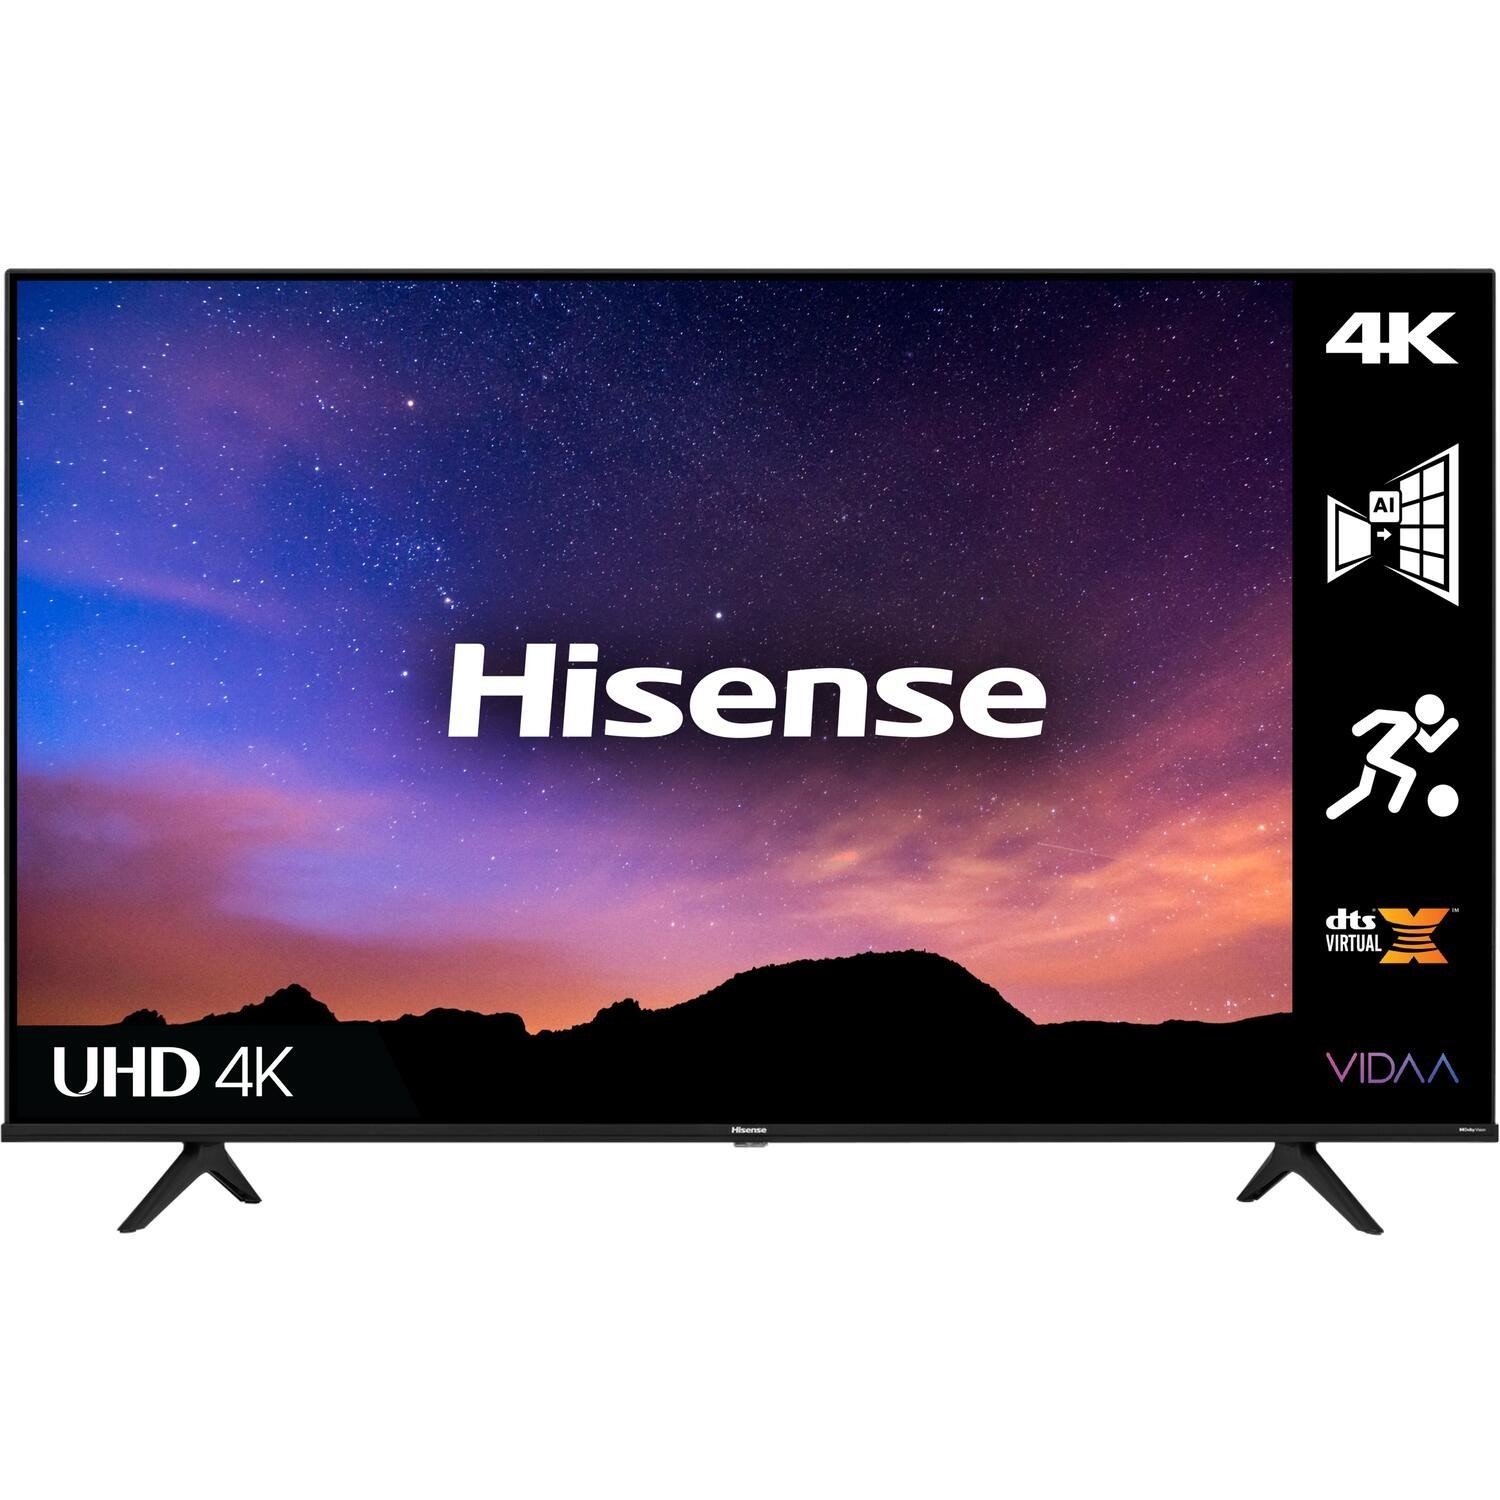 Buy Hisense 43-inch Class A6 Series 4K UHD Smart TV, (43A6K), Built-in  Wi-Fi, HDR, Dolby Atmos: Smart TVs Deals